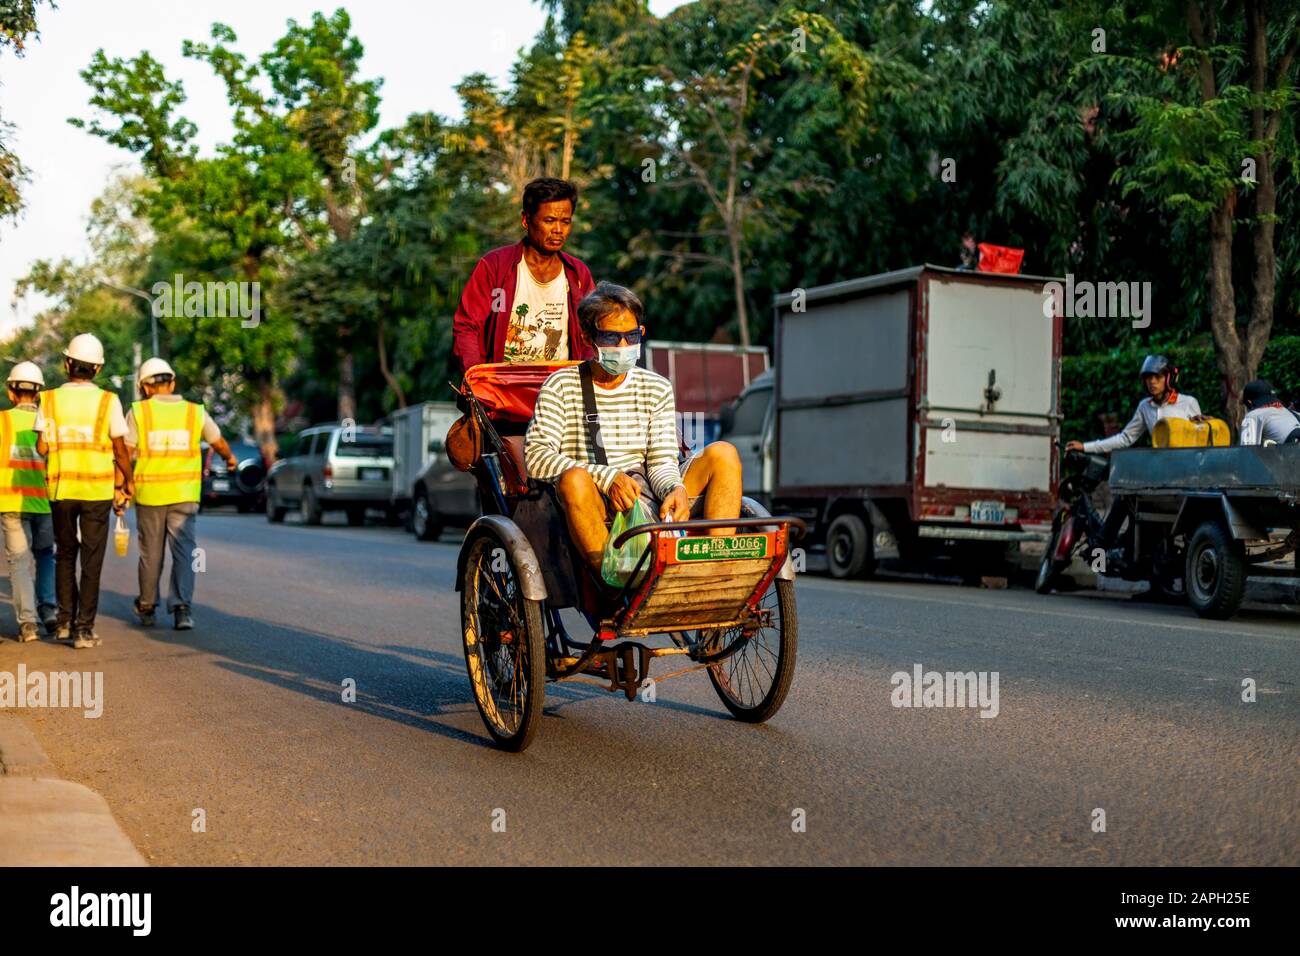 A Khmer cyclo driver is peddling a cyclo while a male passenger sits in the seat on a city street known as art row in urban Phnom Penh, Cambodia. Stock Photo